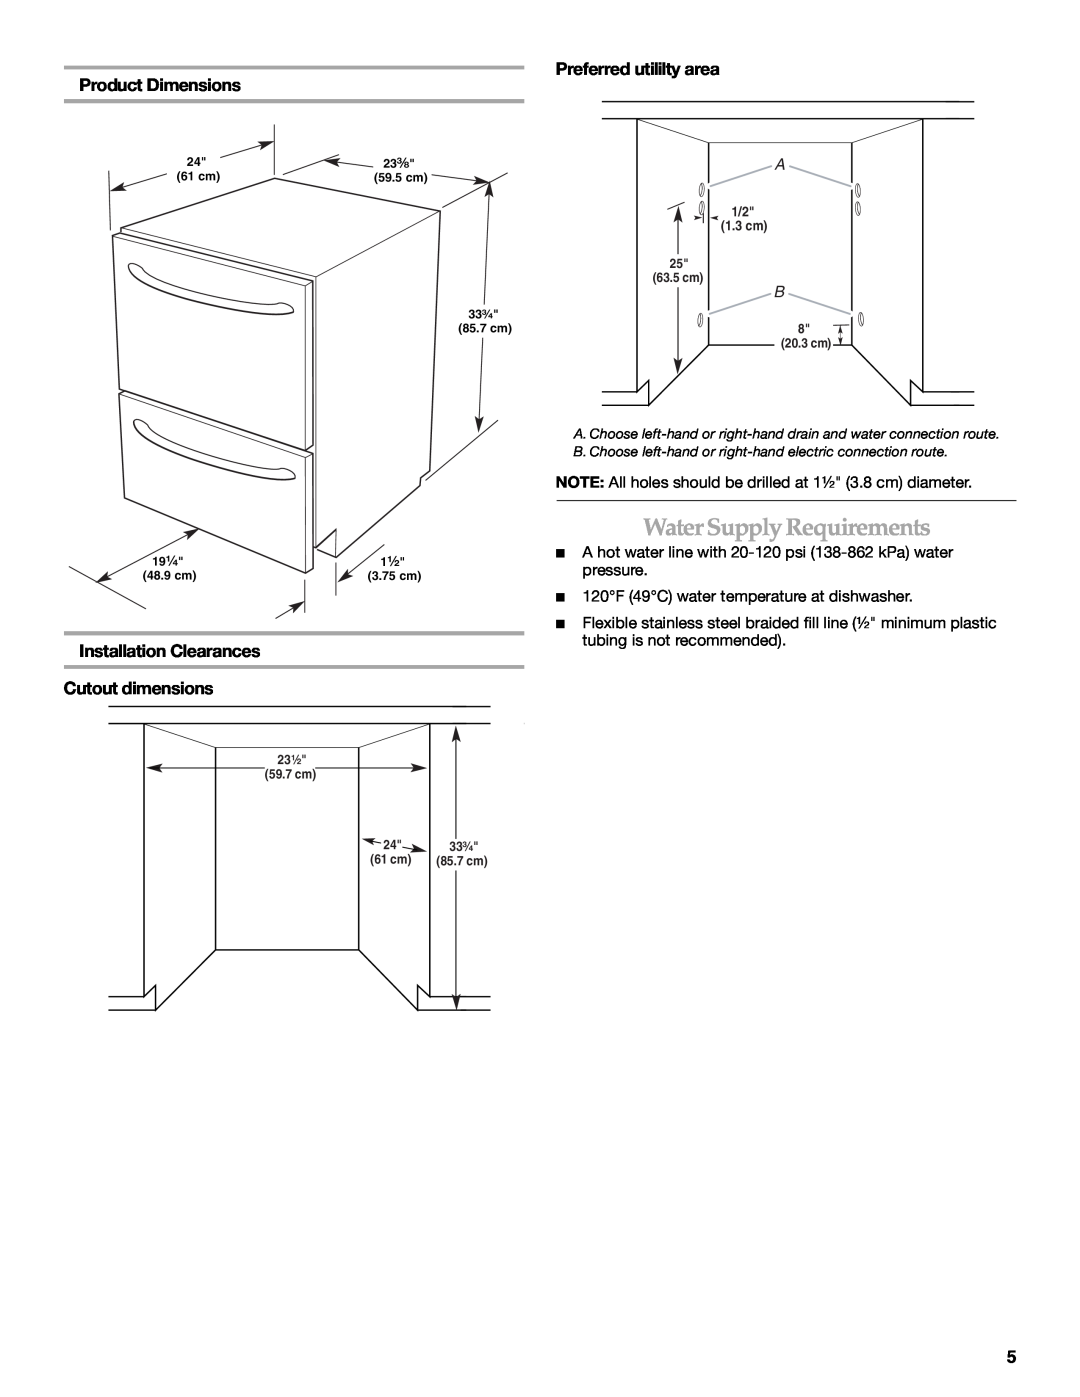 KitchenAid W10118037B installation instructions Water Supply Requirements, Preferred utililty area Product Dimensions 